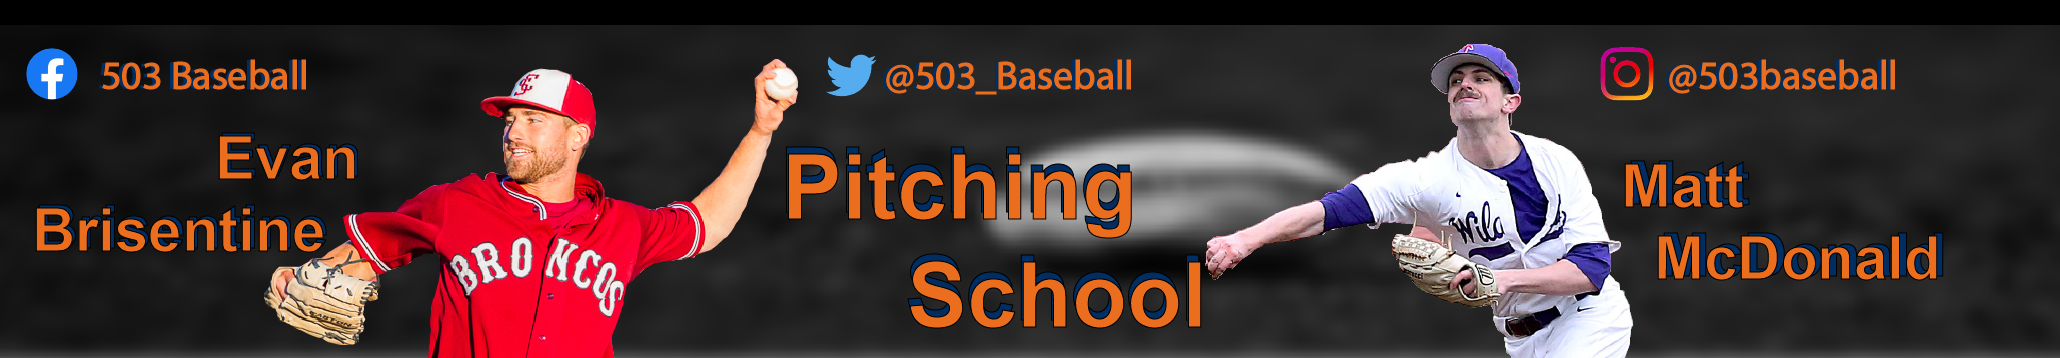 Pitching School Website EB and MM 503 Baseball